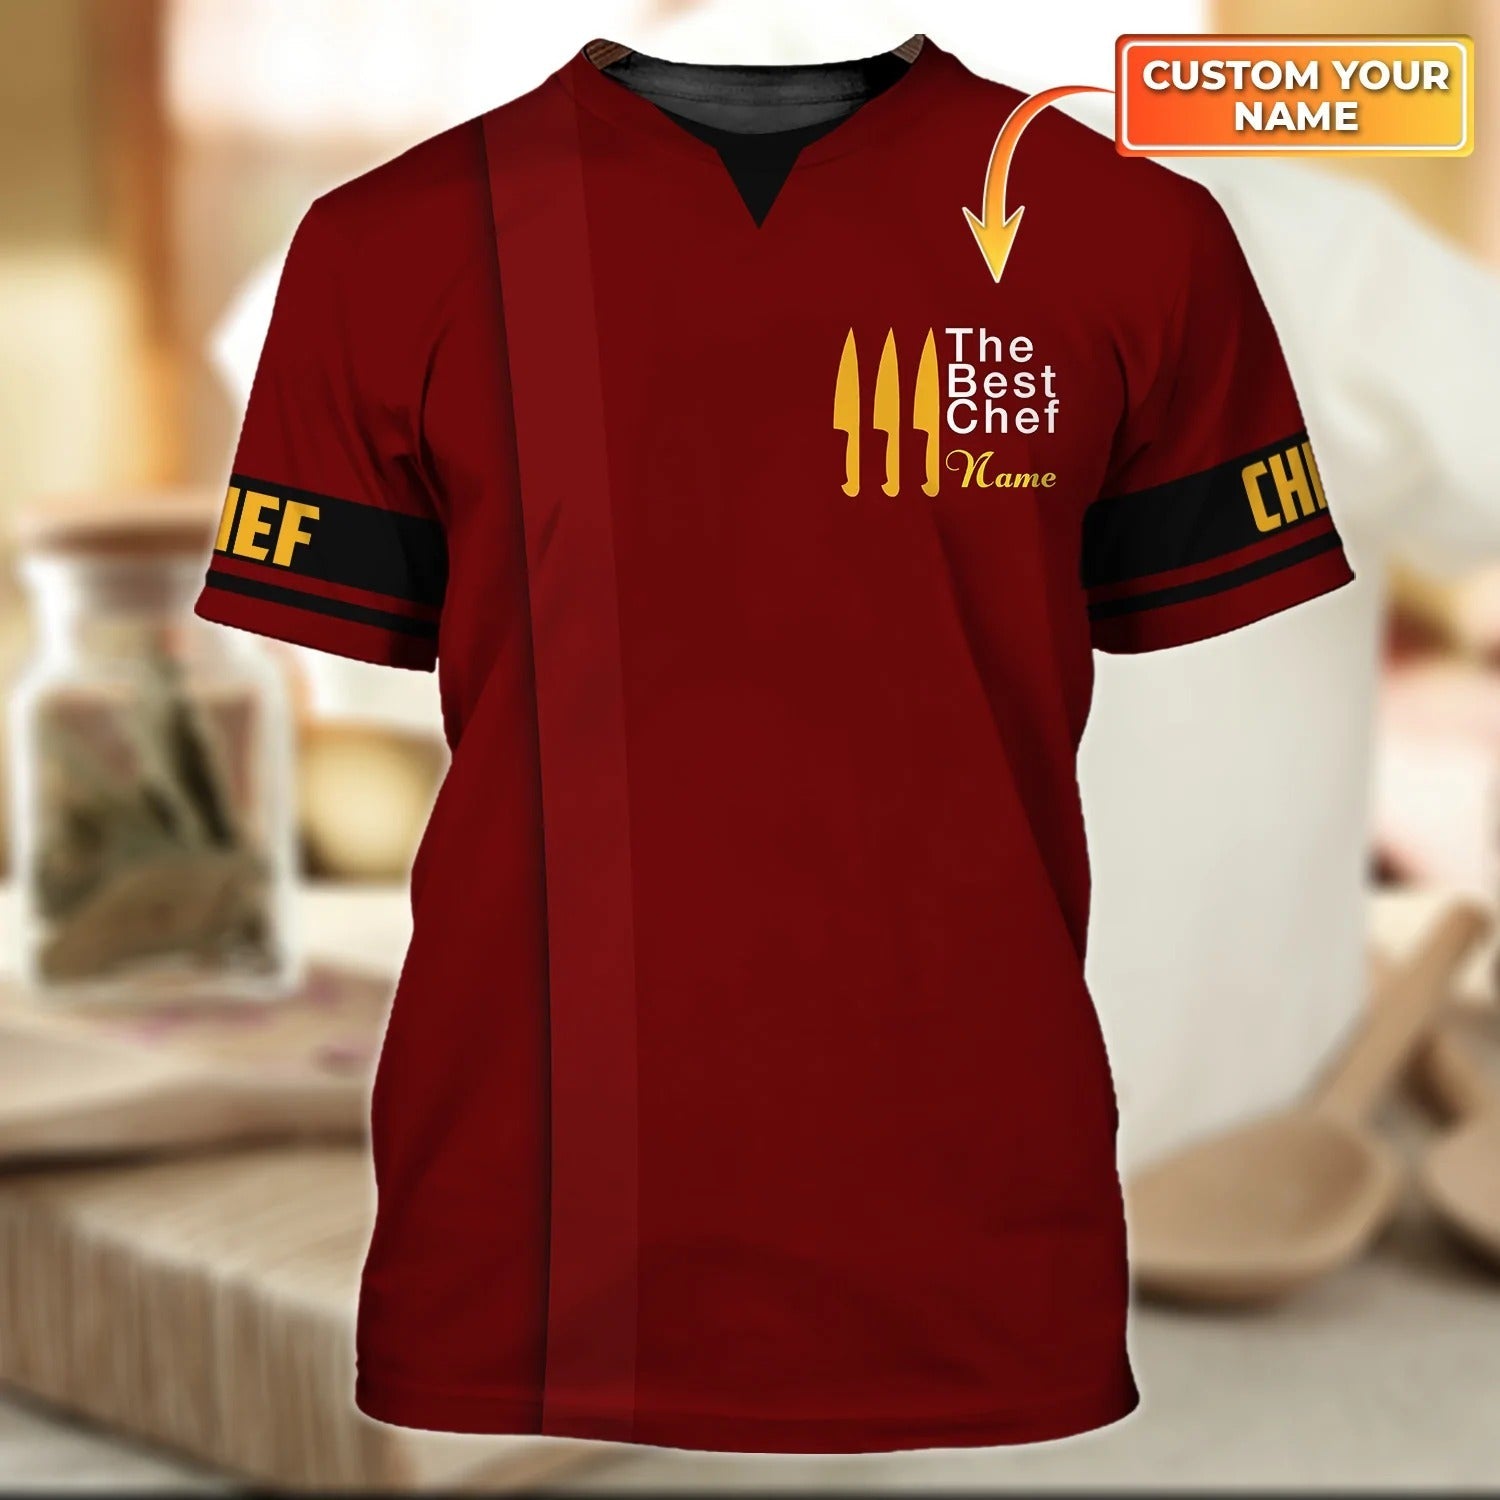 Custom Name 3D Full Printed Red Shirt For Chef/ The Best Chef T Shirt/ Chef Shirts